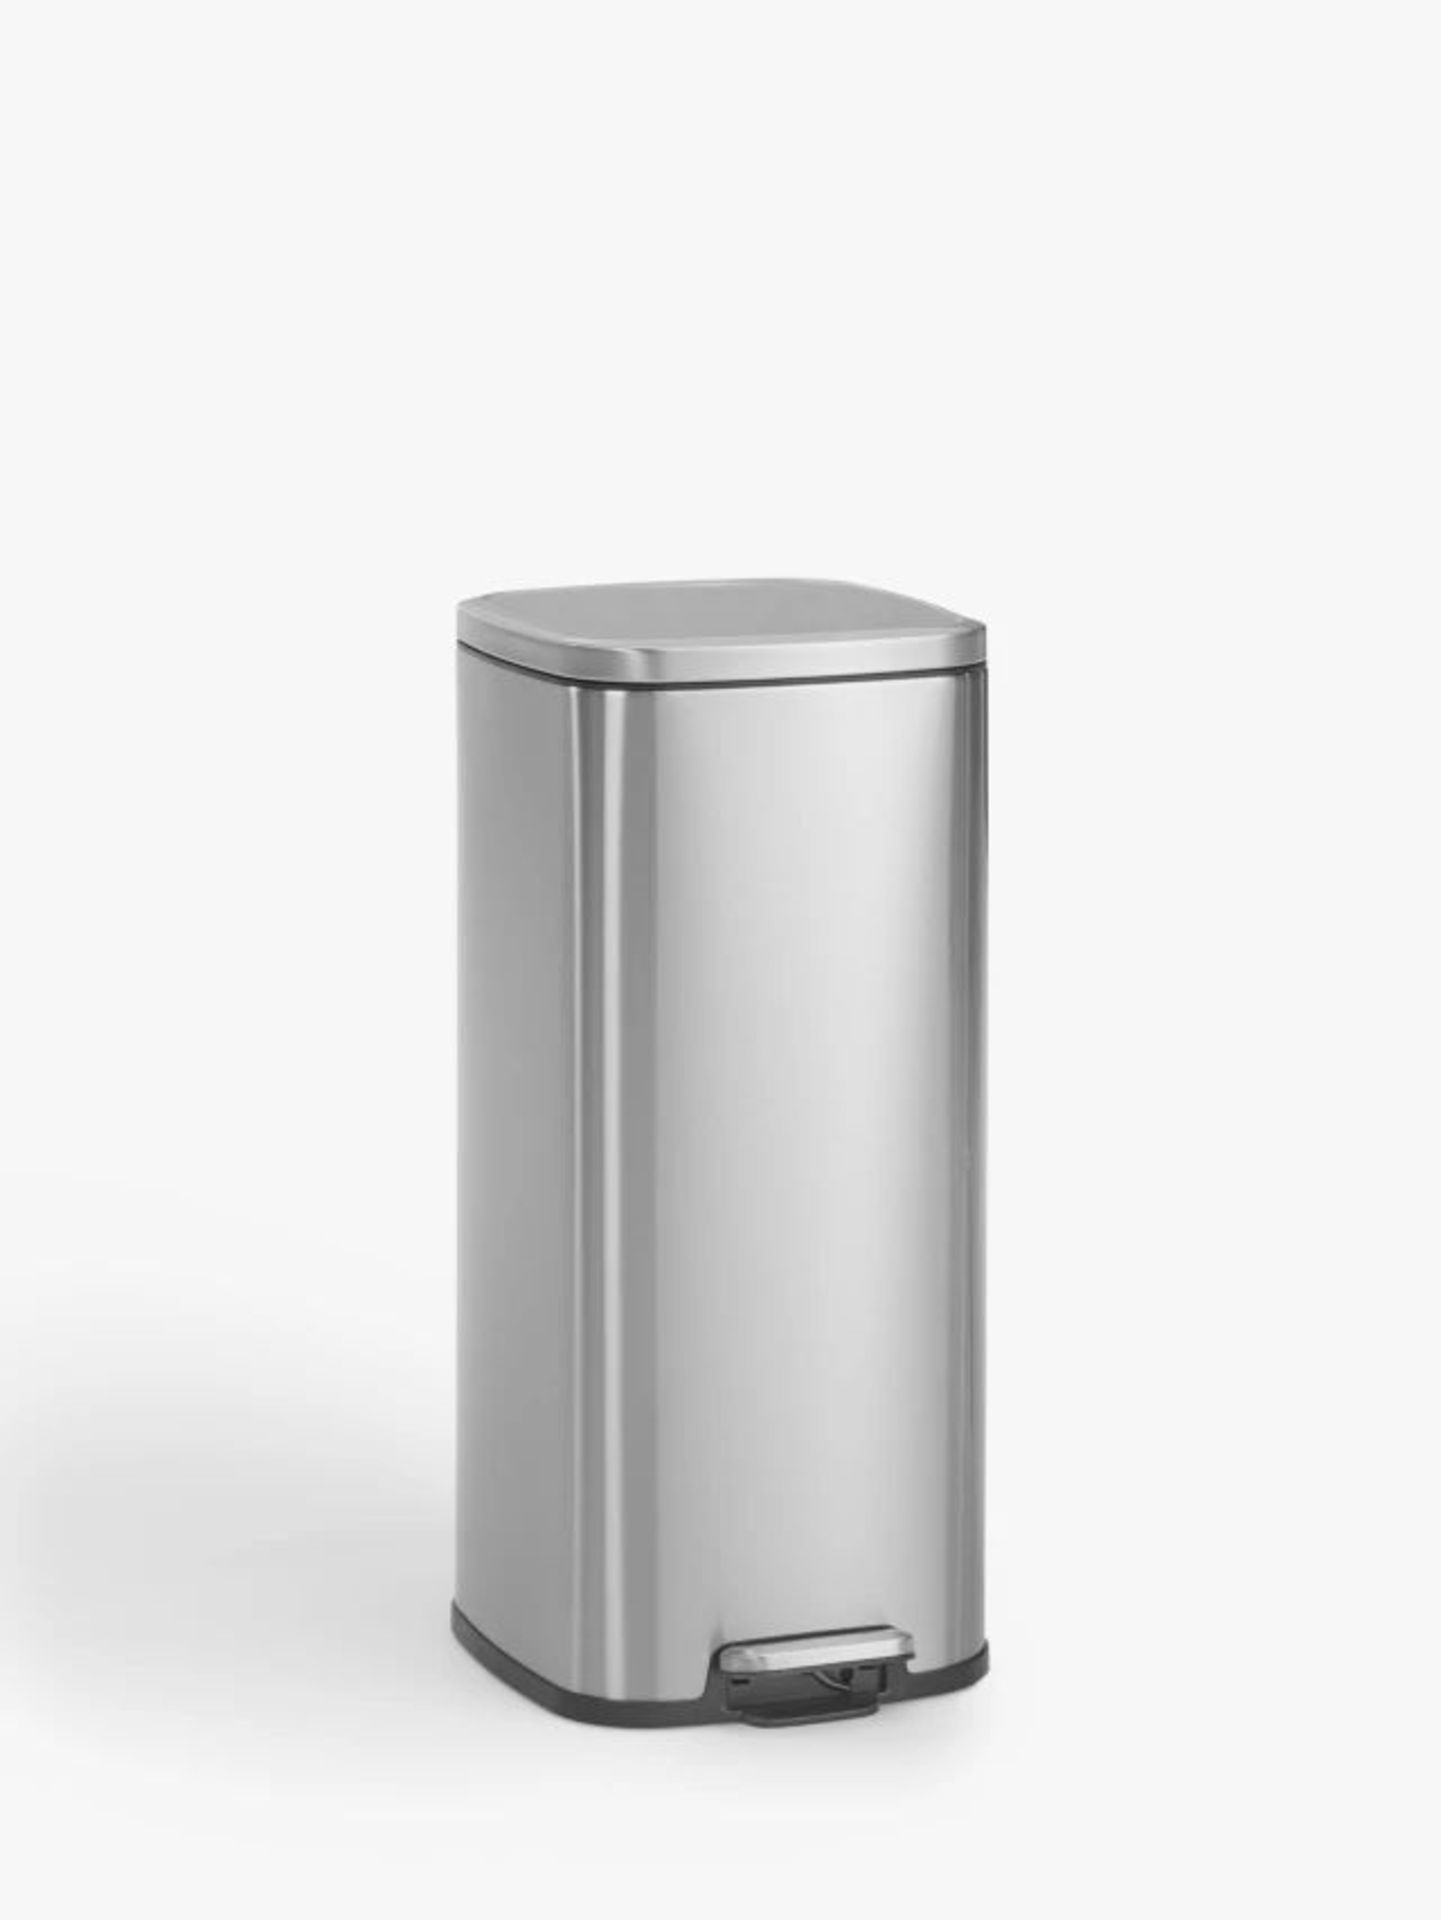 John Lewis ANYDAY Pedal Bin, 30L, Stainless Steel. - EBR1. A compact, colourful, curved edge pedal